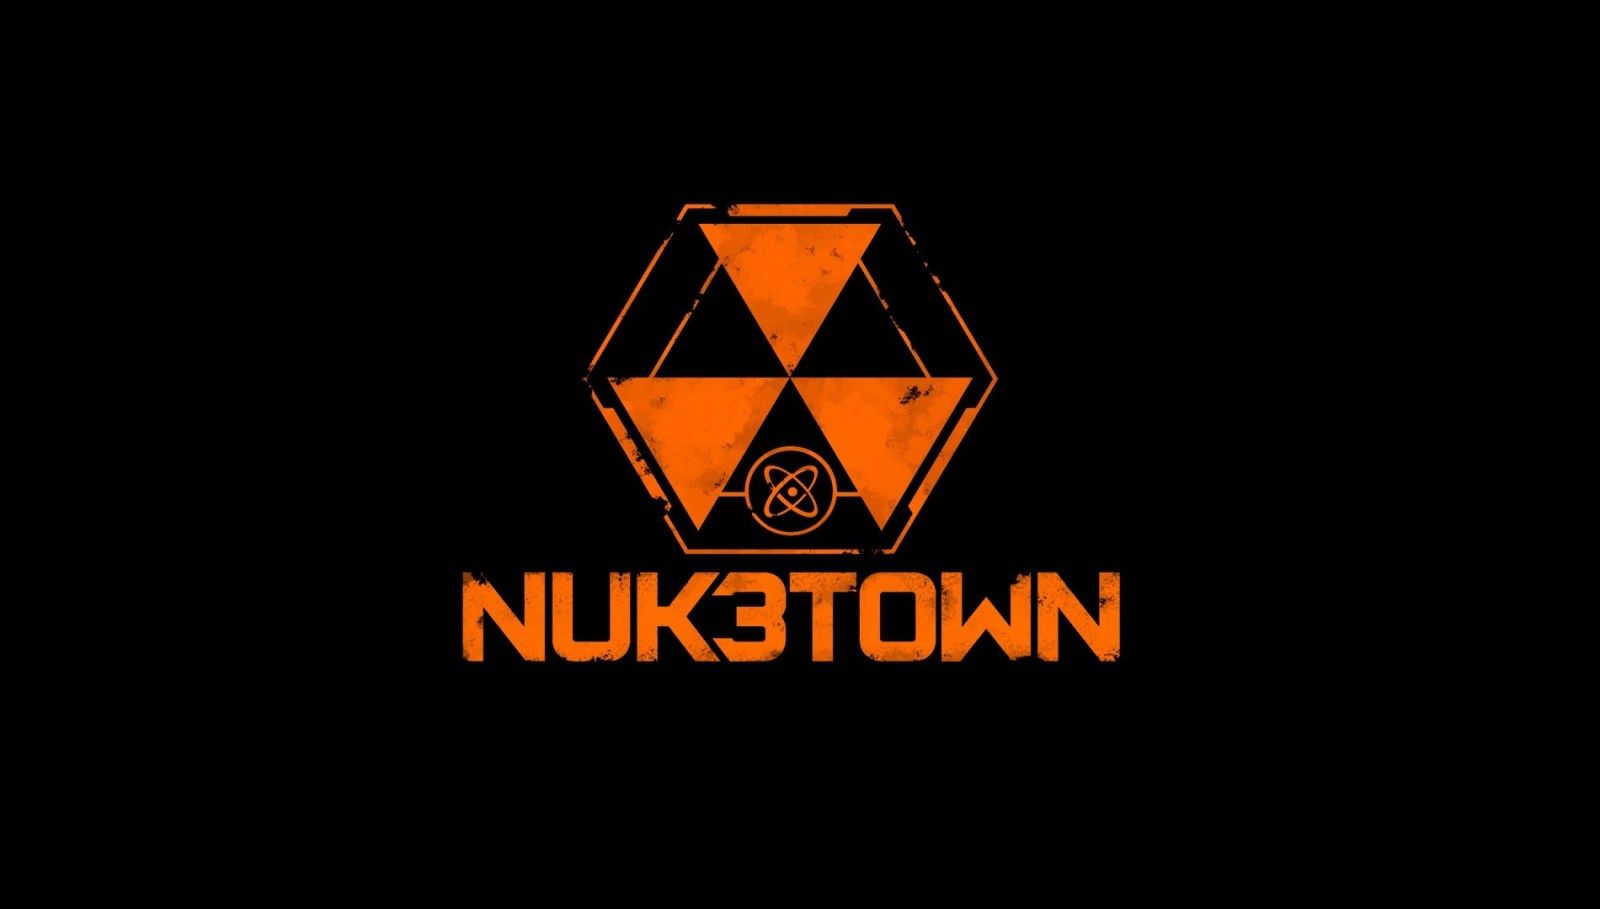 Wallpaper, text, logo, brand, Call of Duty Black Ops III, BO Black Ops 3 Map, NUK3TOWN, font 1900x1080